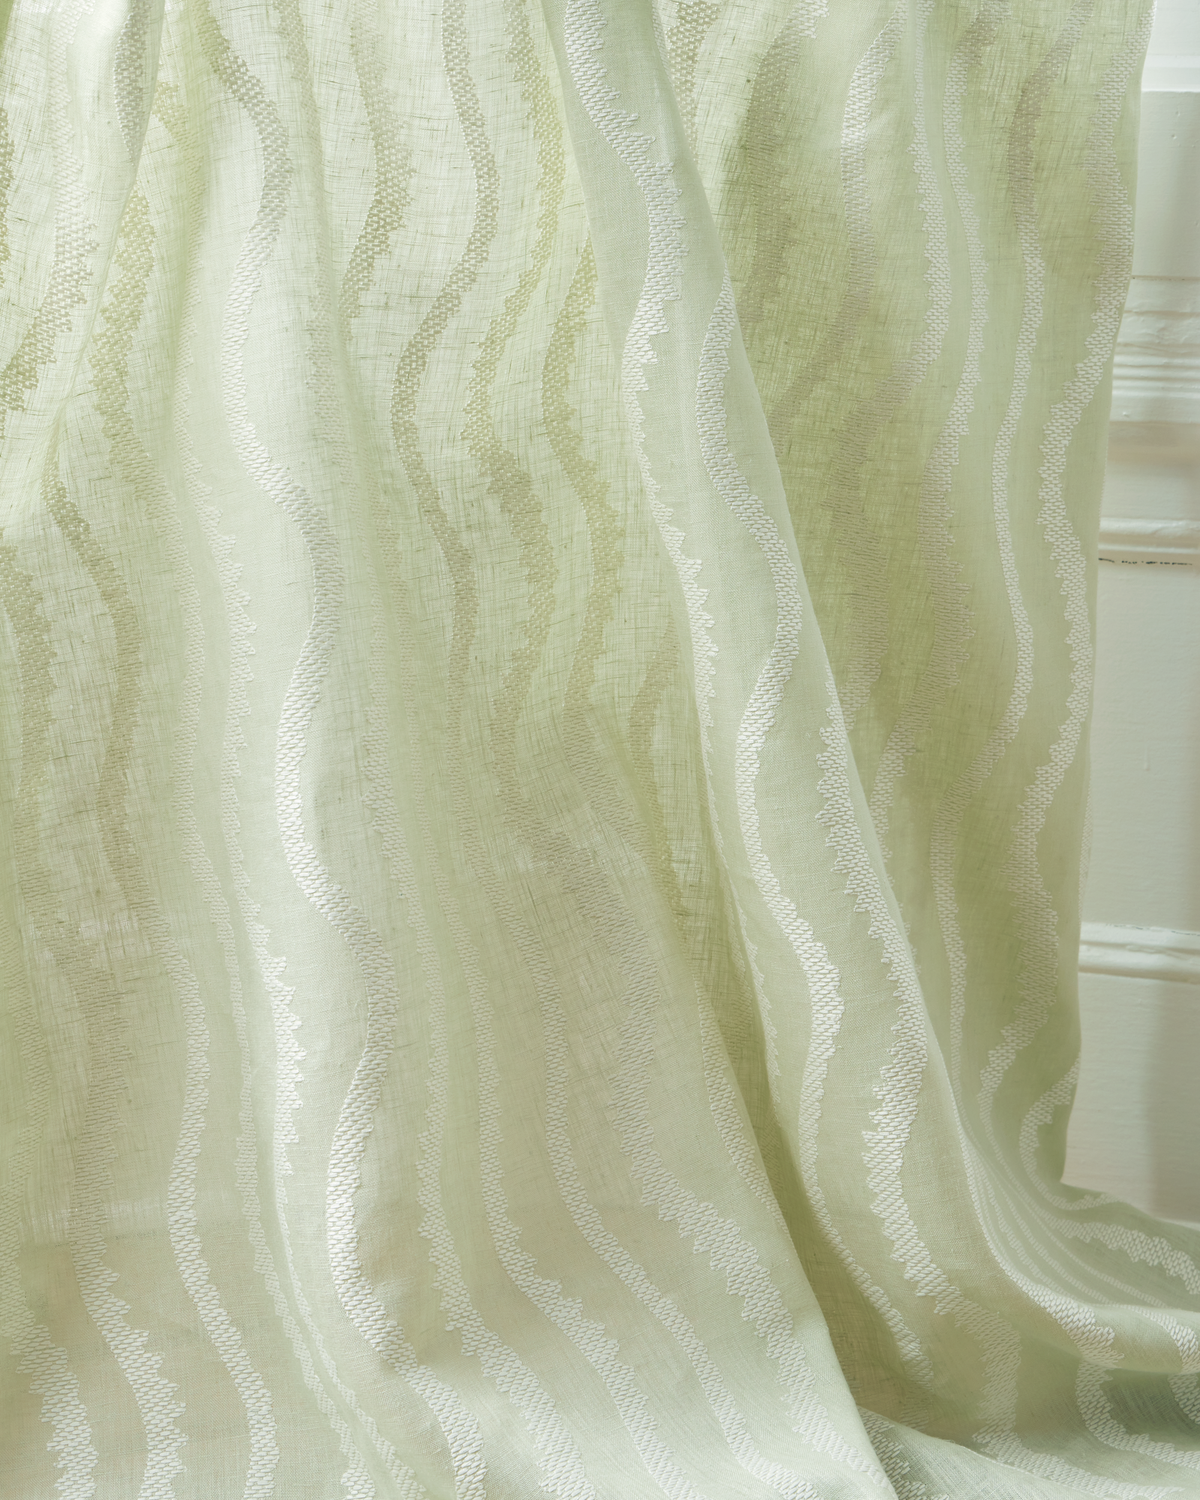 Notched Vines Sheer Fabric in Pistachio